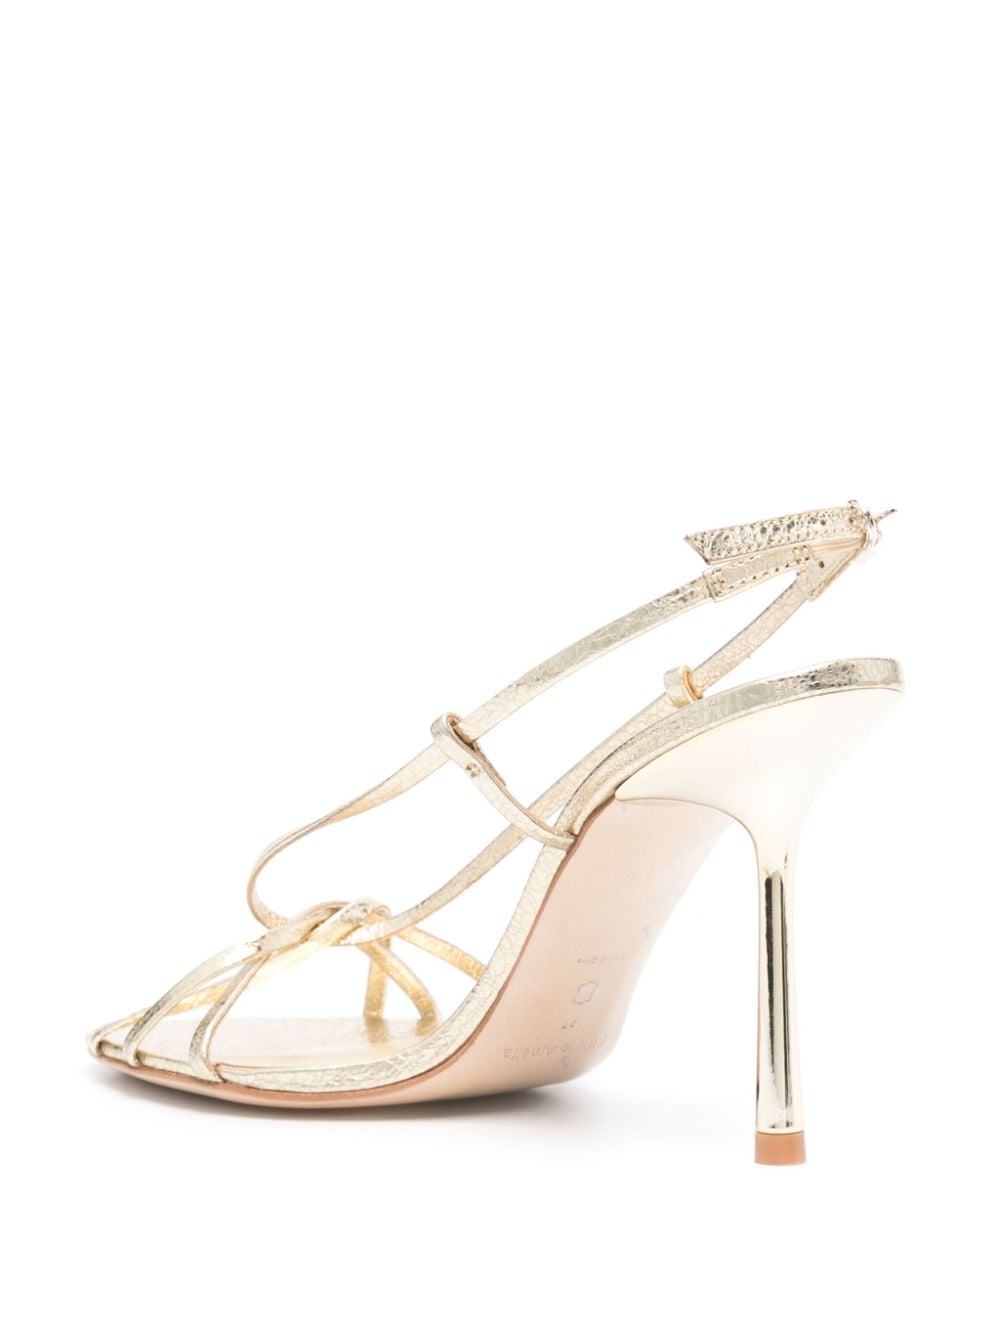 Shop Studio Amelia Entwined 90mm Leather Sandals In Gold